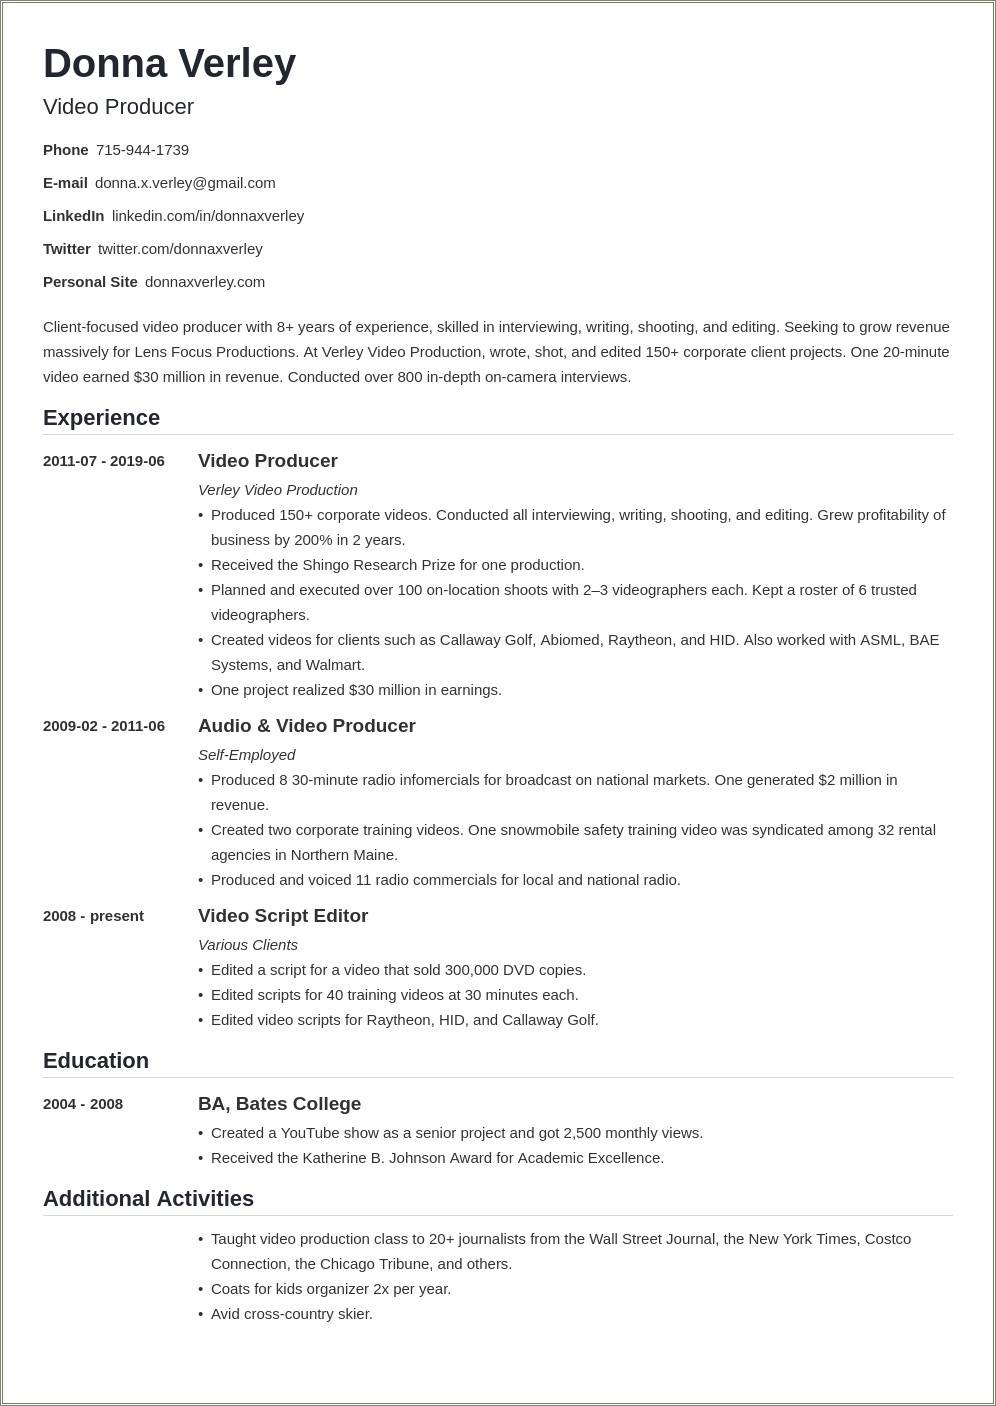 For Resume For Work Experience Self Employed